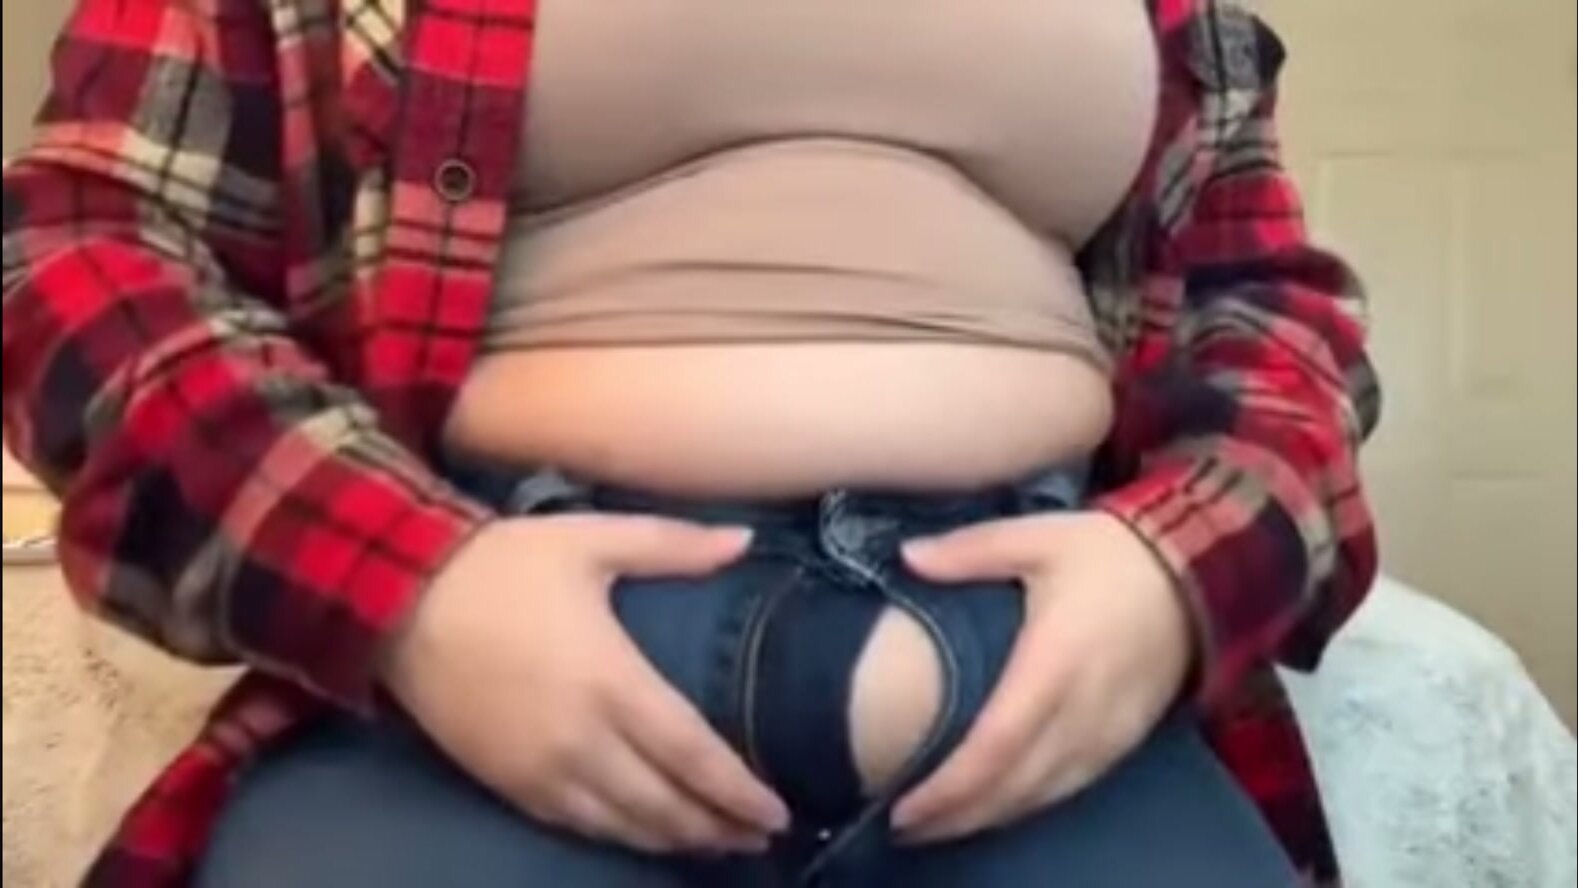 Big belly in jeans